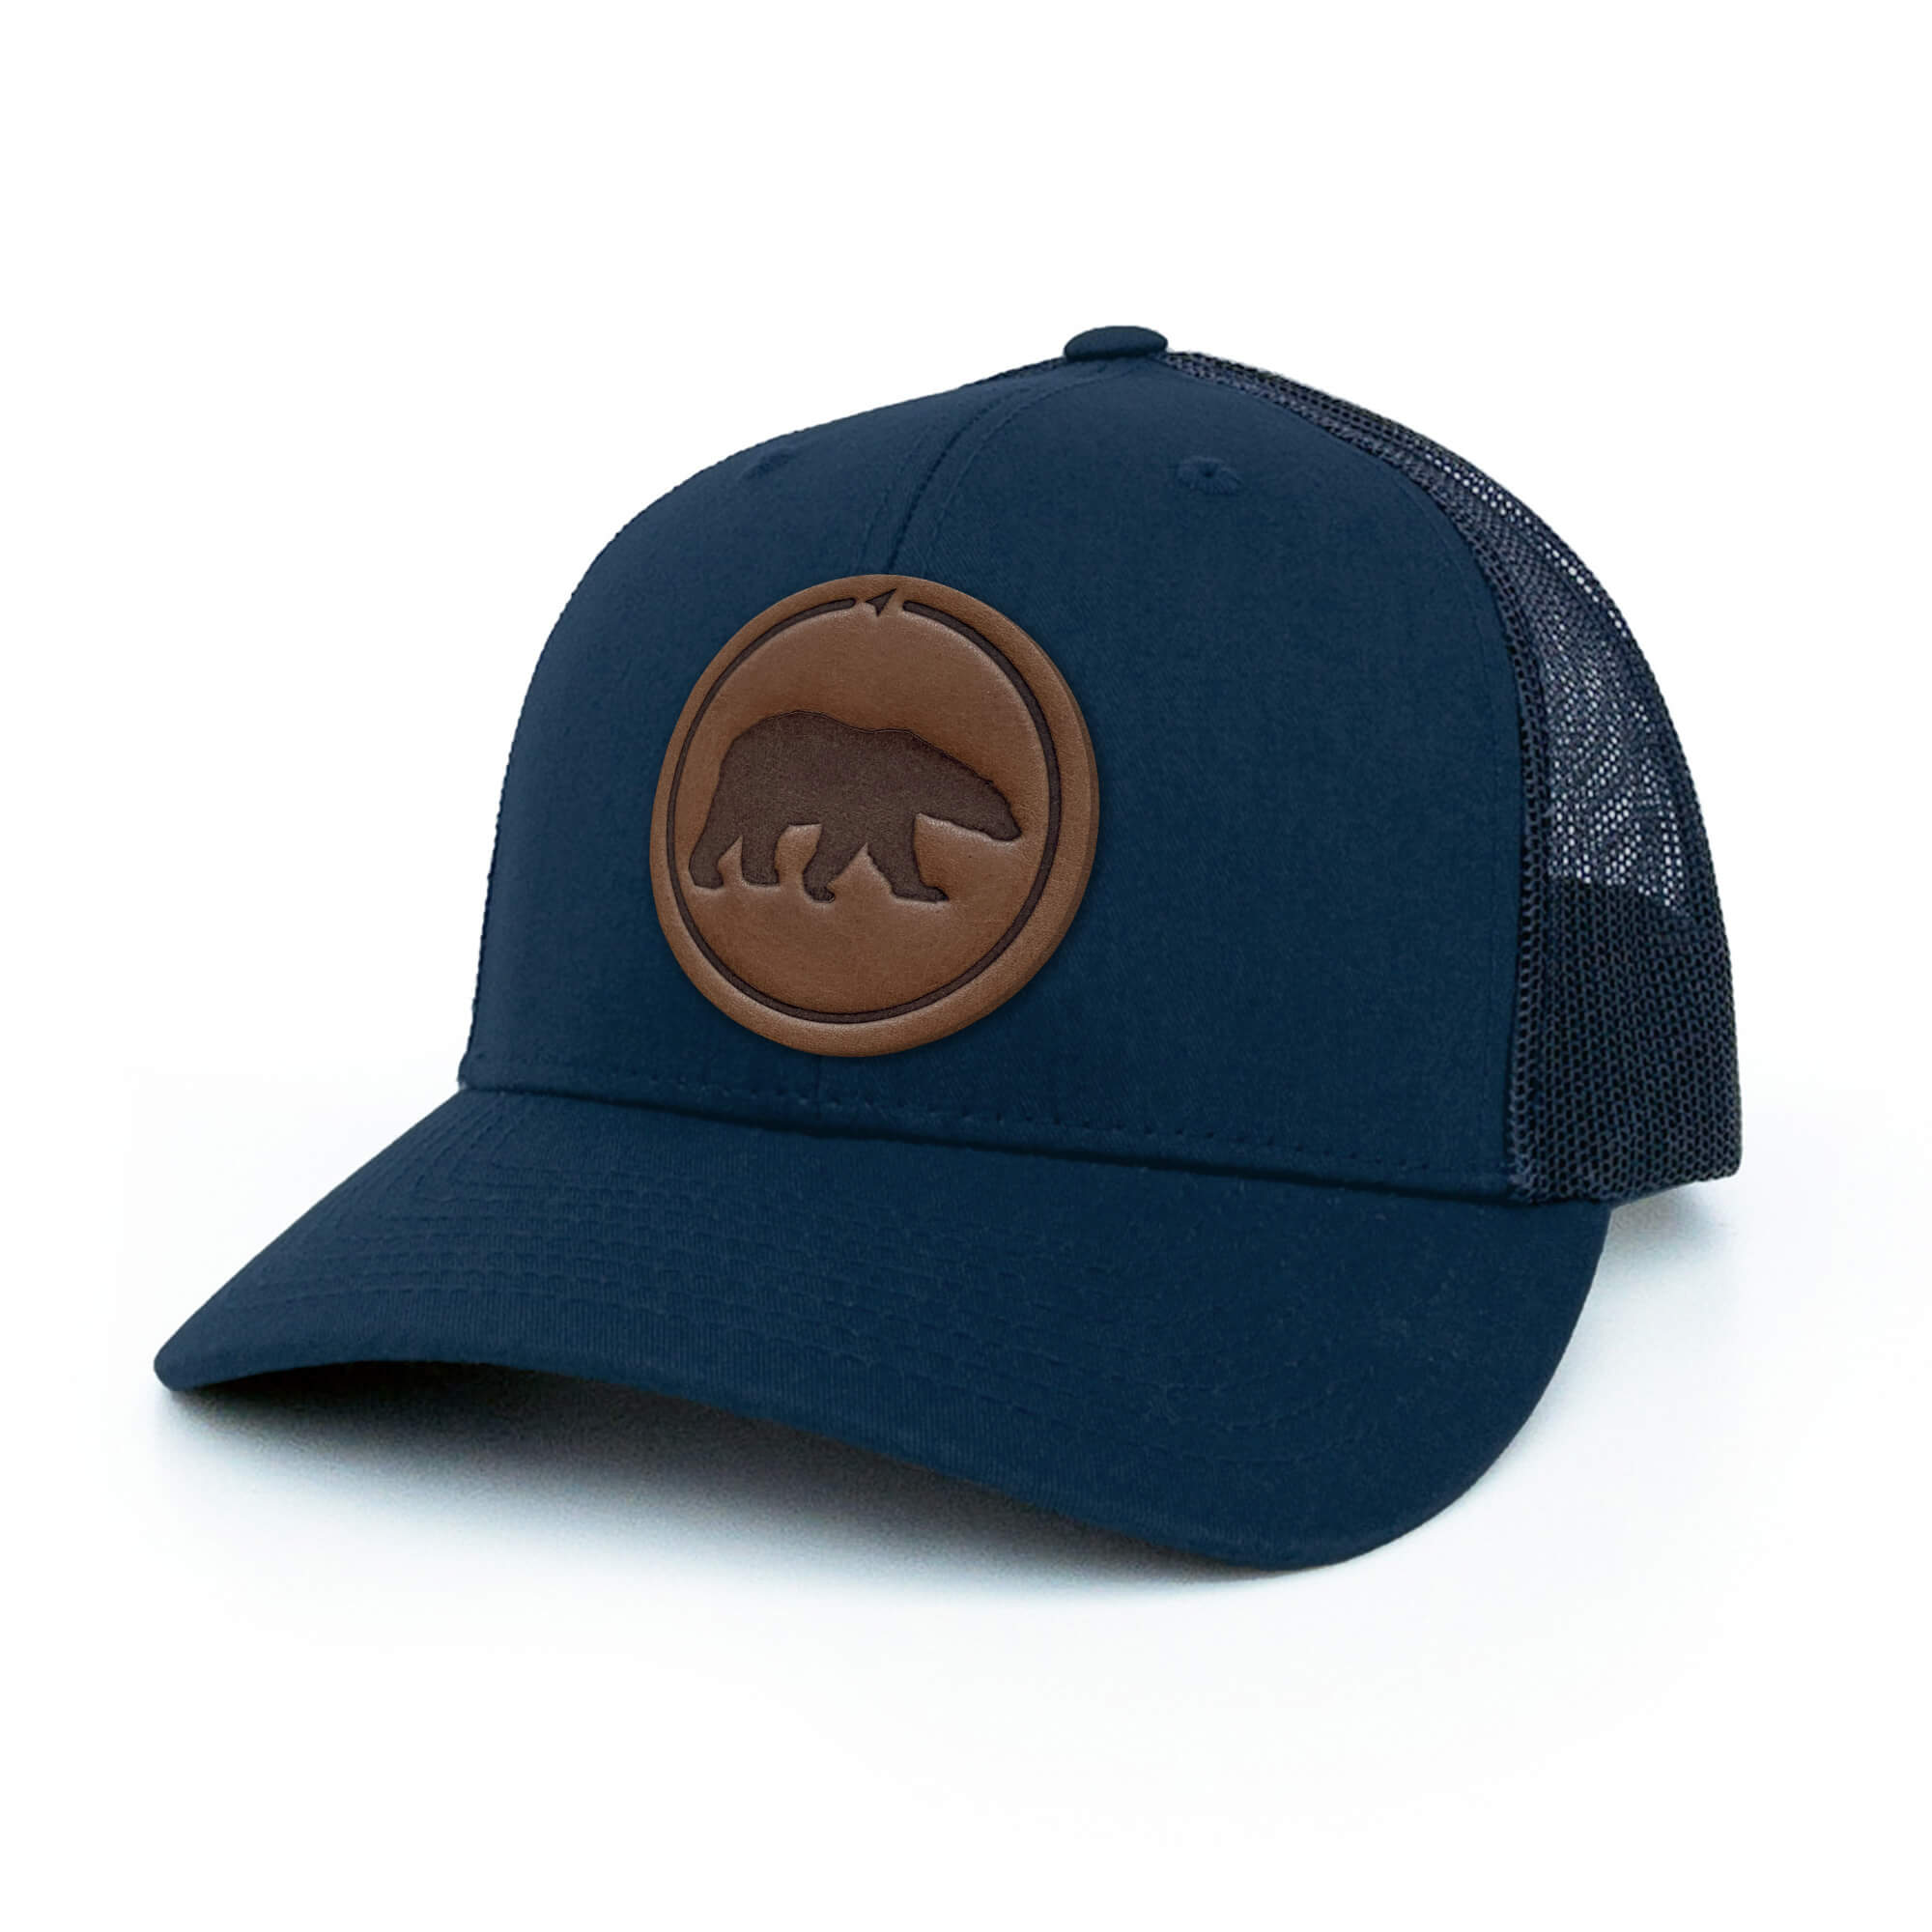 Navy trucker hat with full-grain leather patch of a Polar Bear | BLACK-004-003, CHARC-004-003, NAVY-004-003, HGREY-004-003, MOSS-004-003, BROWN-004-003